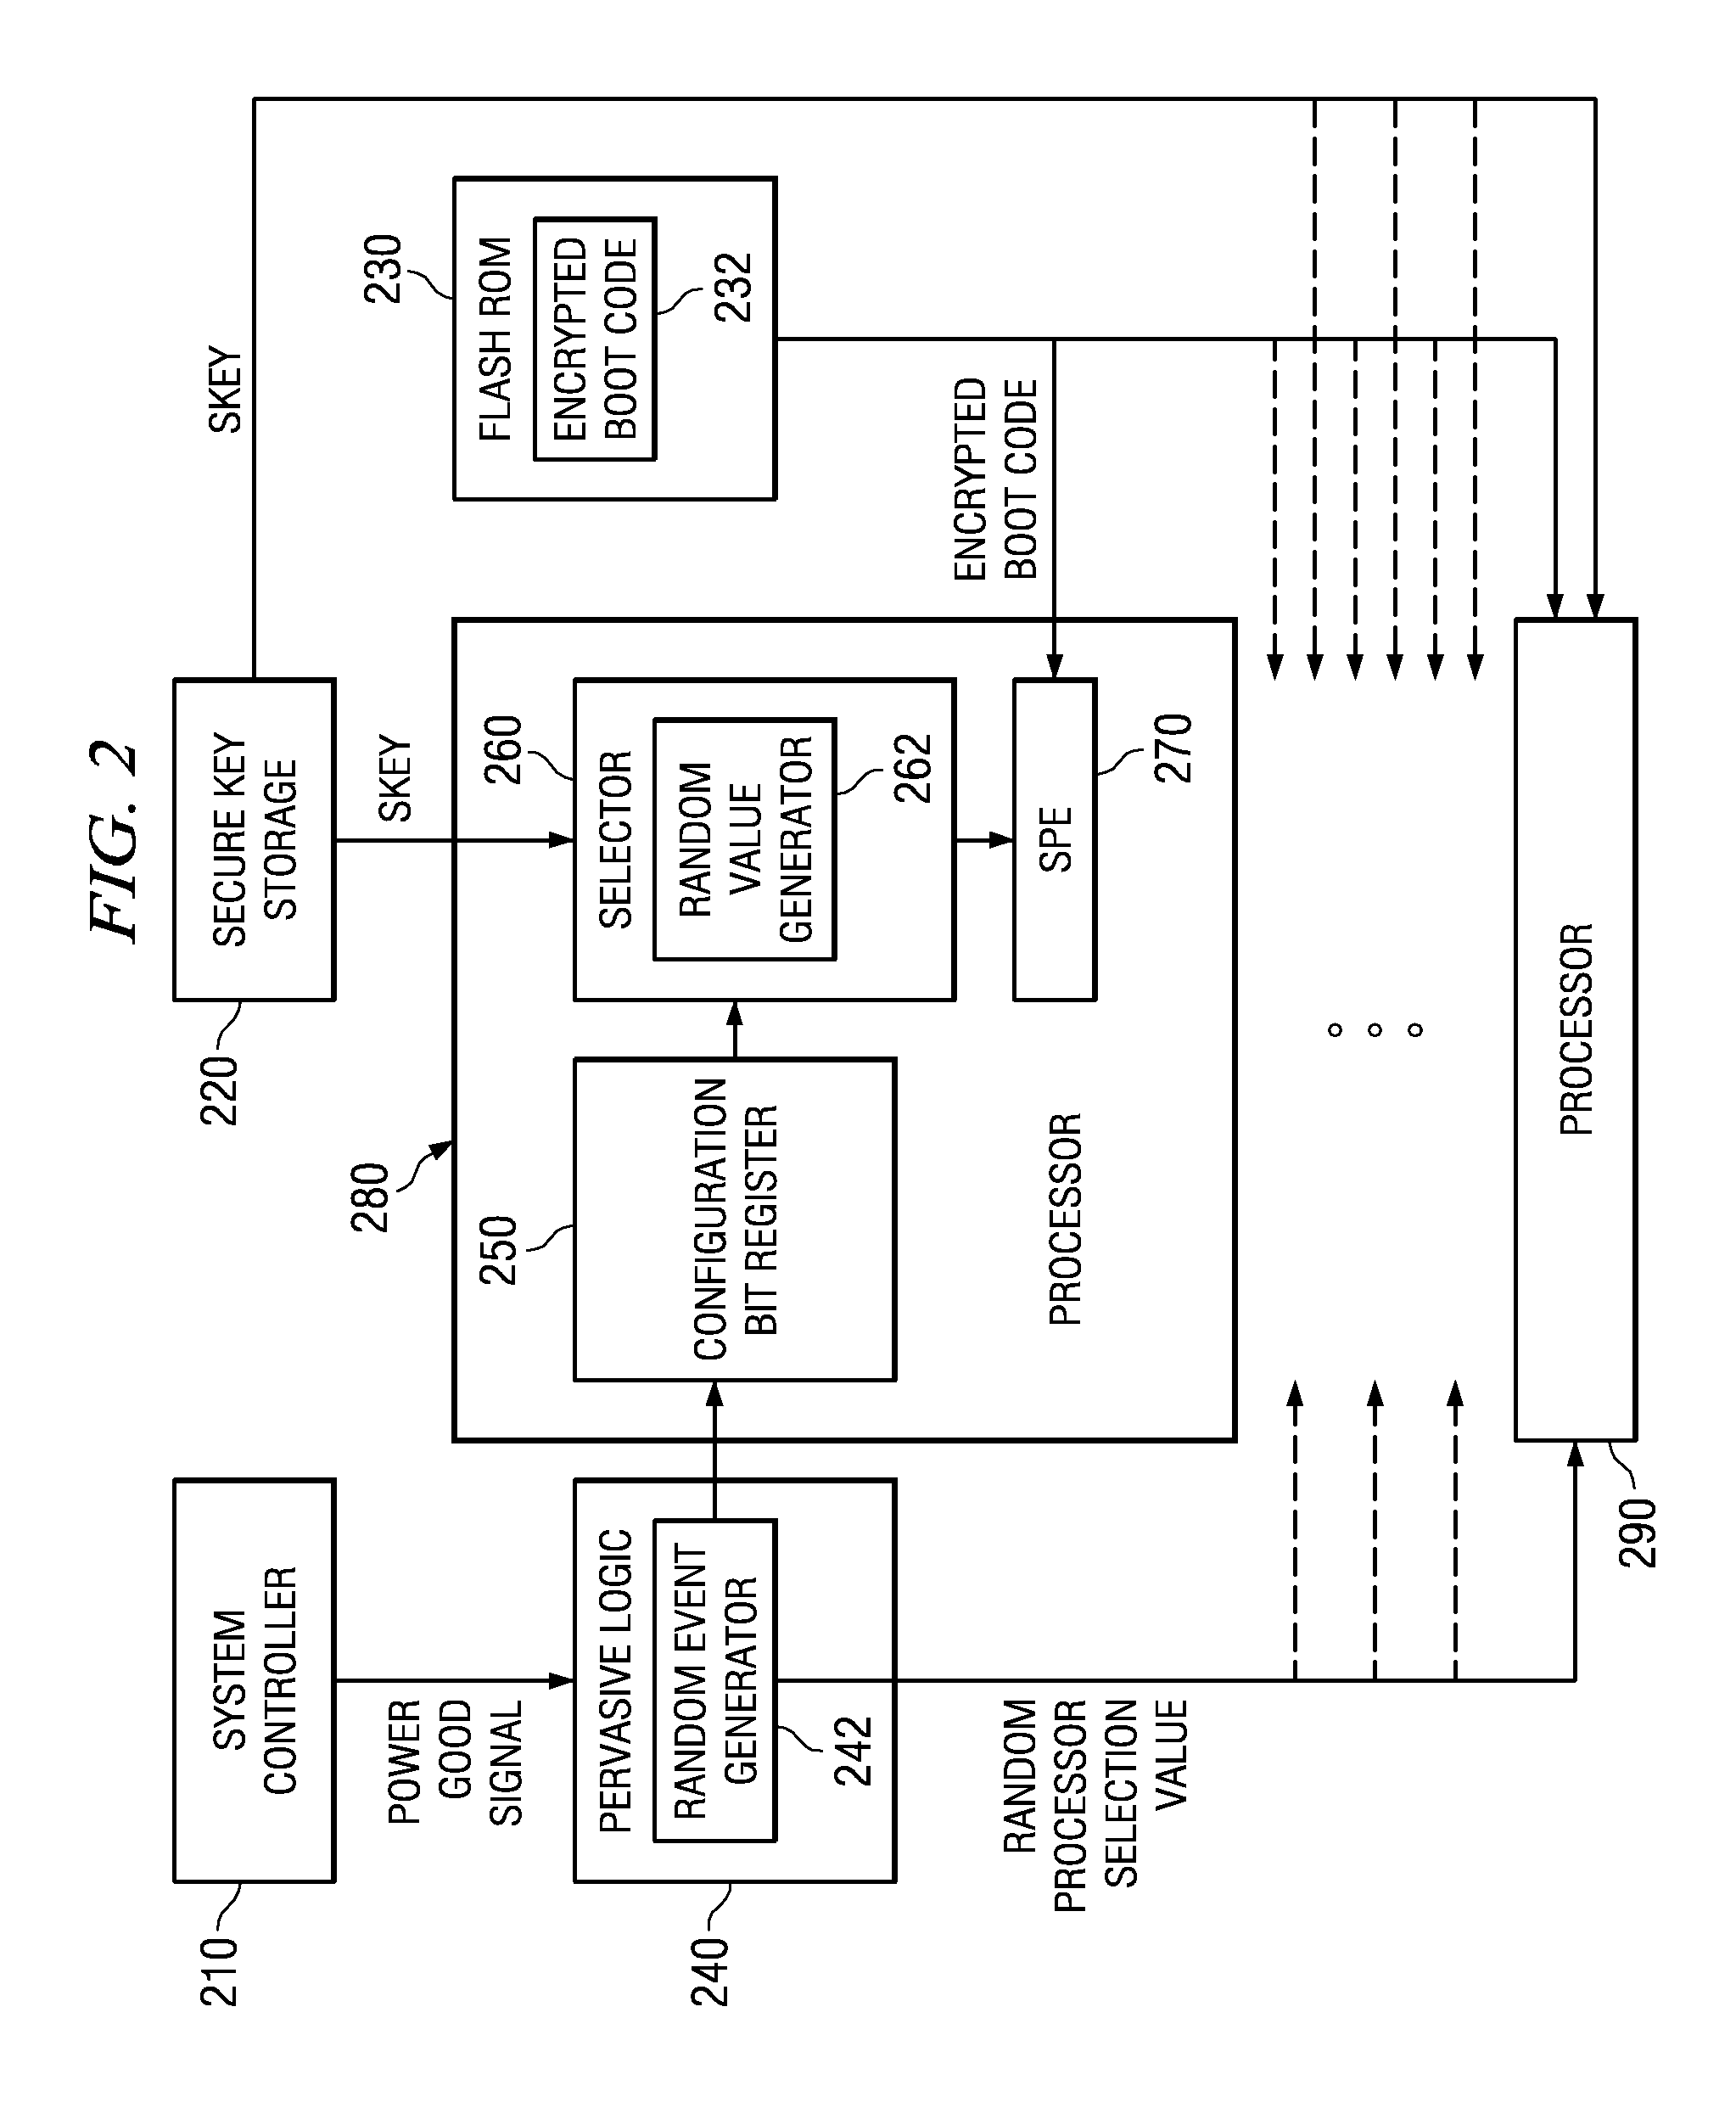 System and Method for Booting a Multiprocessor Device Based on Selection of Encryption Keys to be Provided to Processors